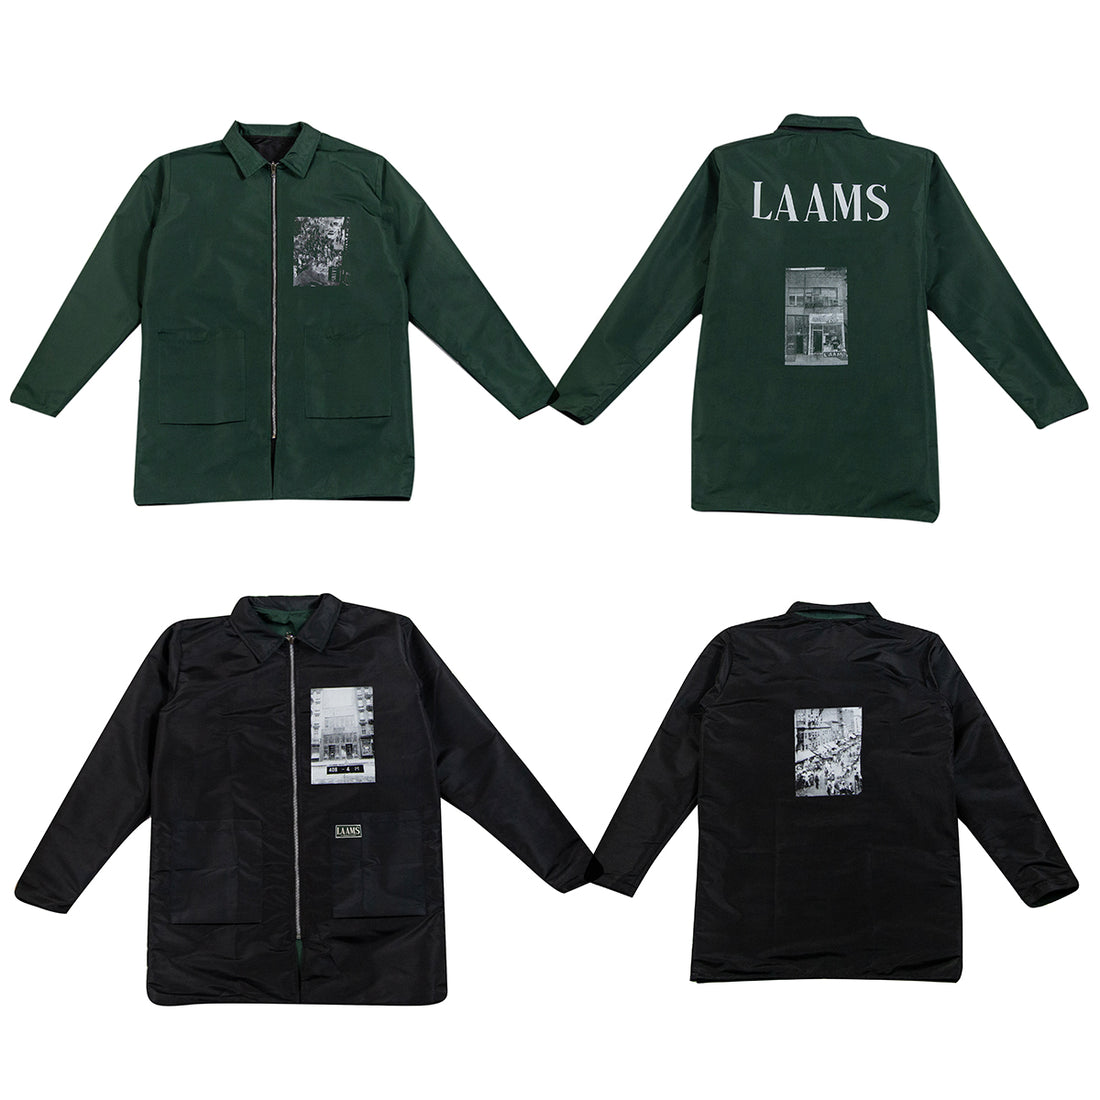 LAAMS 1 Year Anniversary Collection